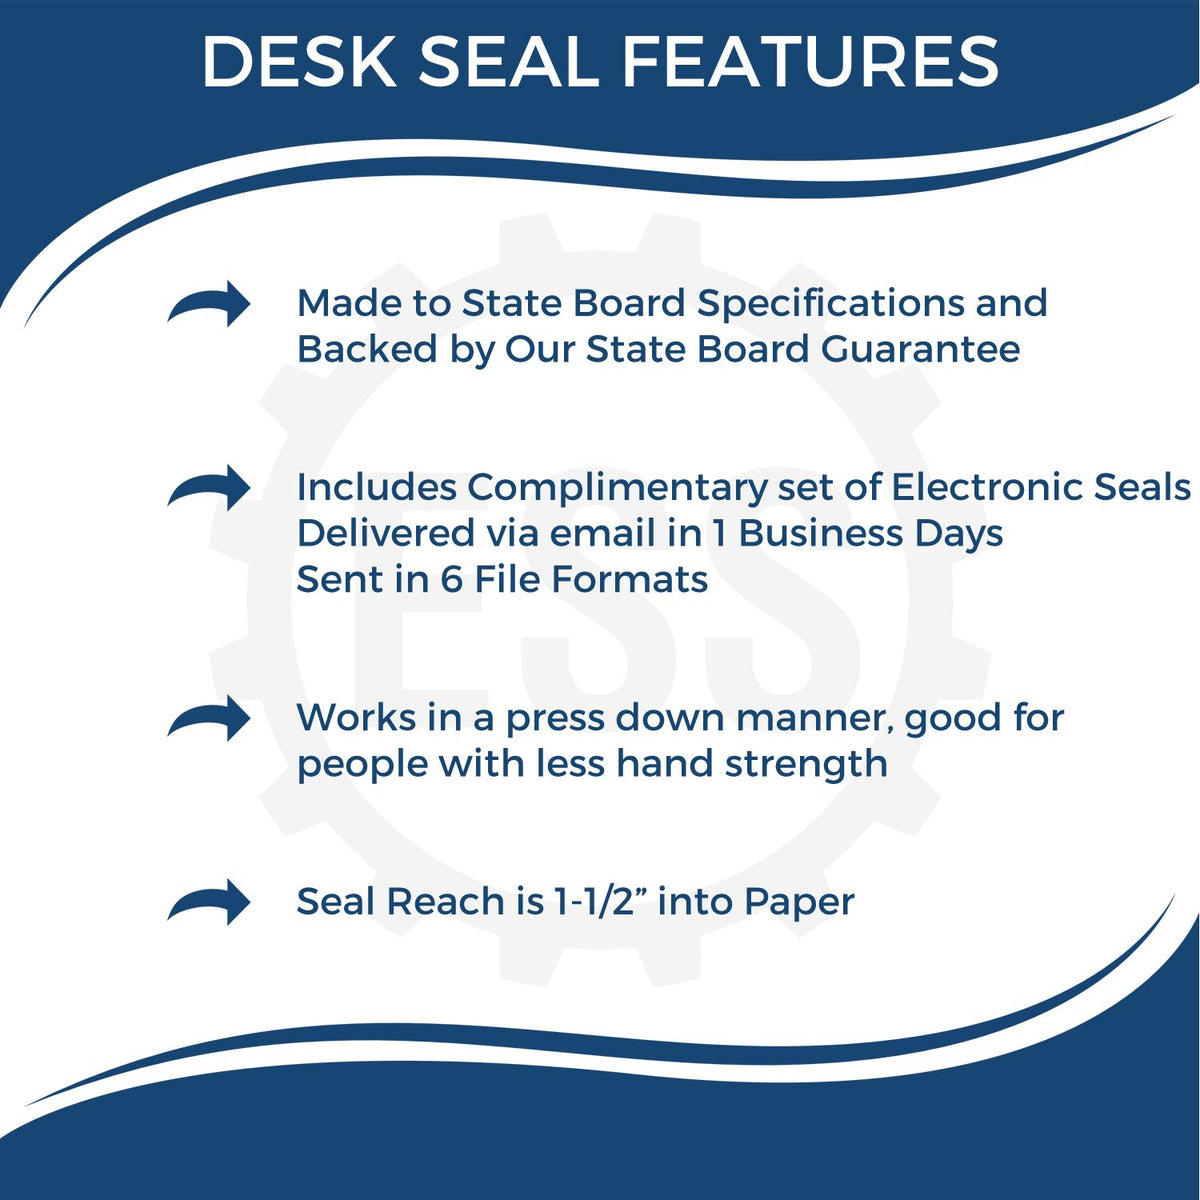 A picture of an infographic highlighting the selling points for the Georgia Desk Architect Embossing Seal